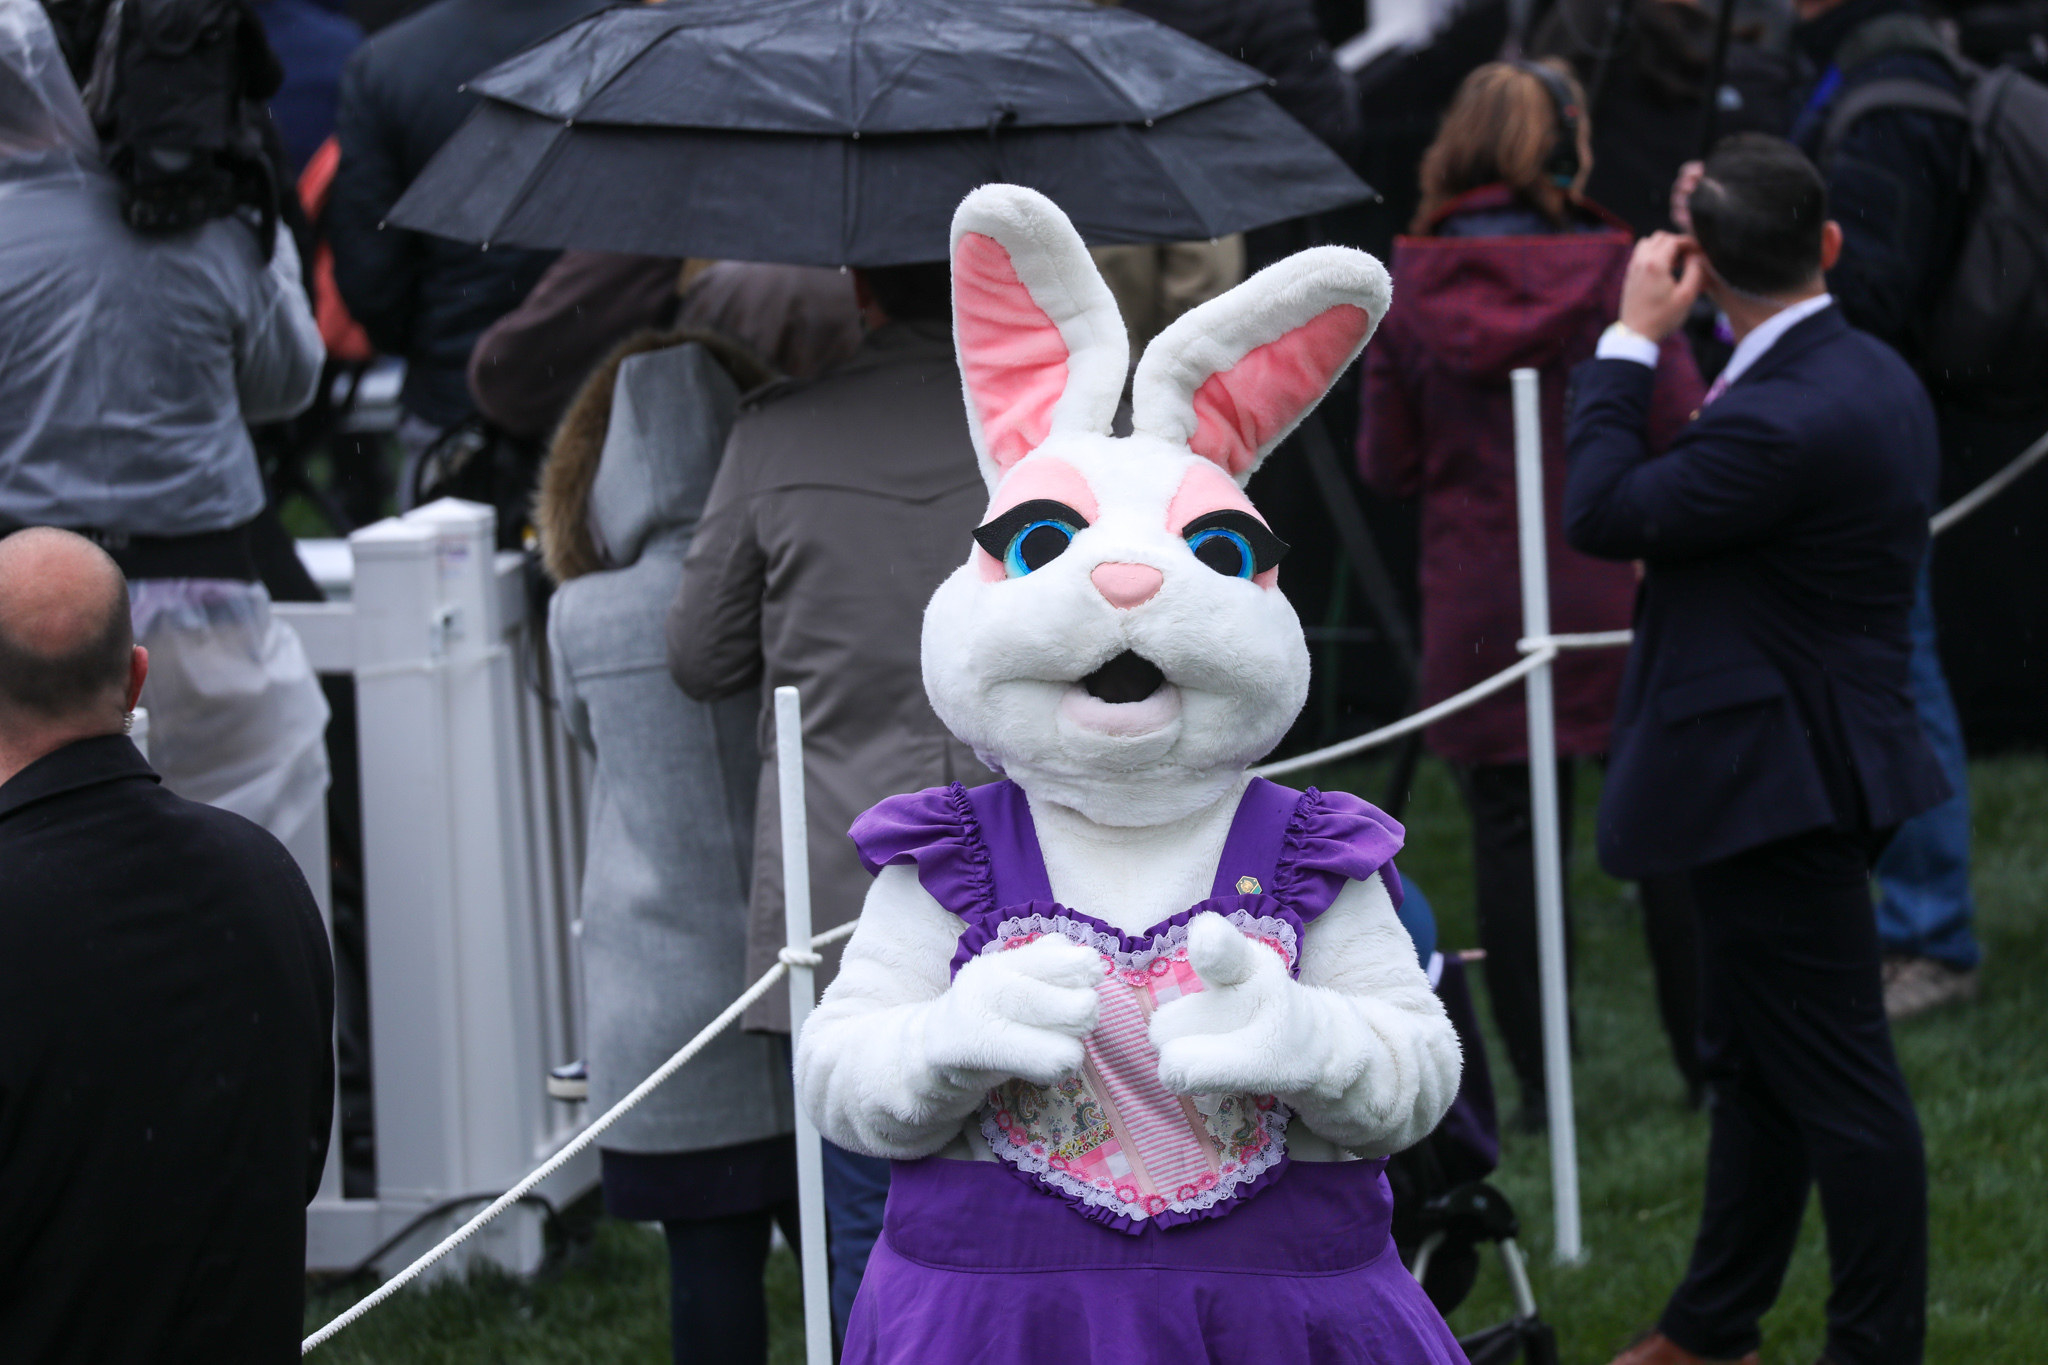 Purple-dress Bunny is seen looking at the camera